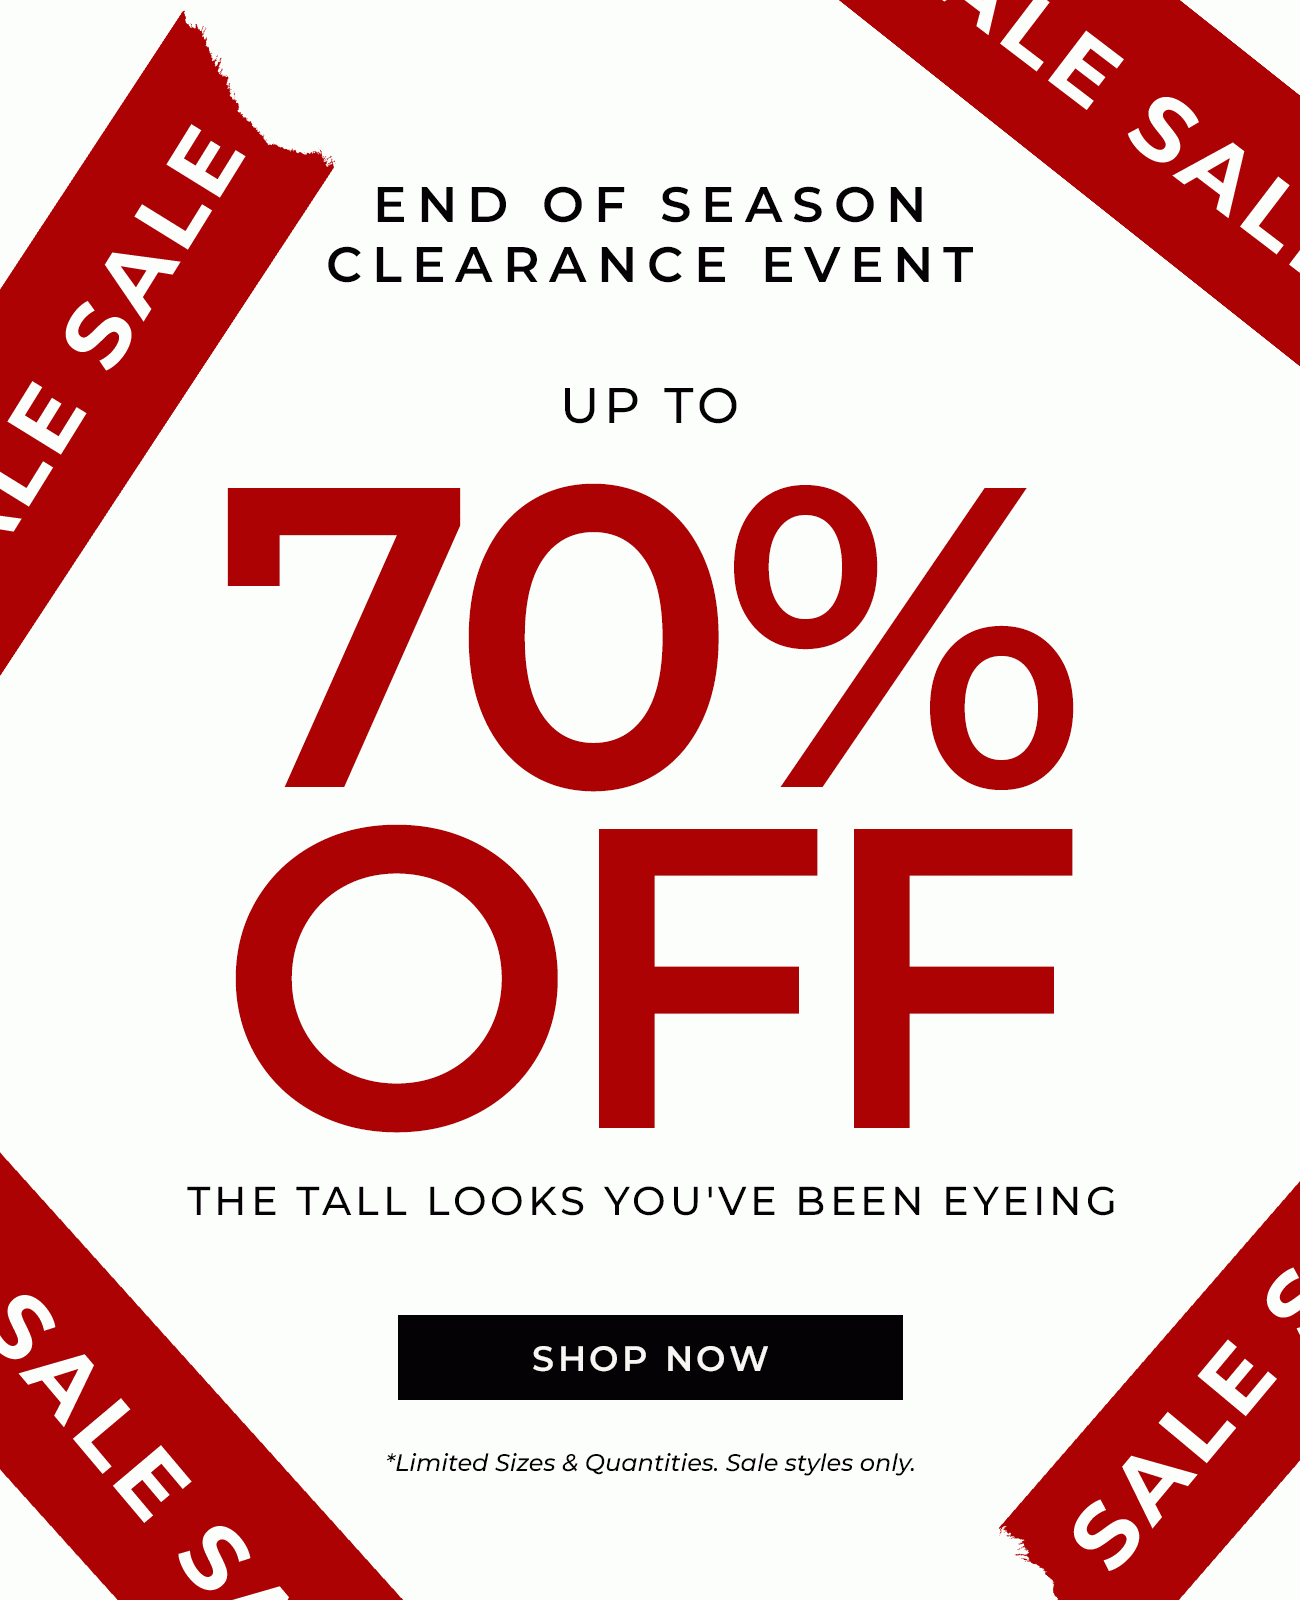 END OF SEASON CLEARANCE EVENT - Up To 70% Off THE TALL LOOKS YOU'VE BEEN EYEING!